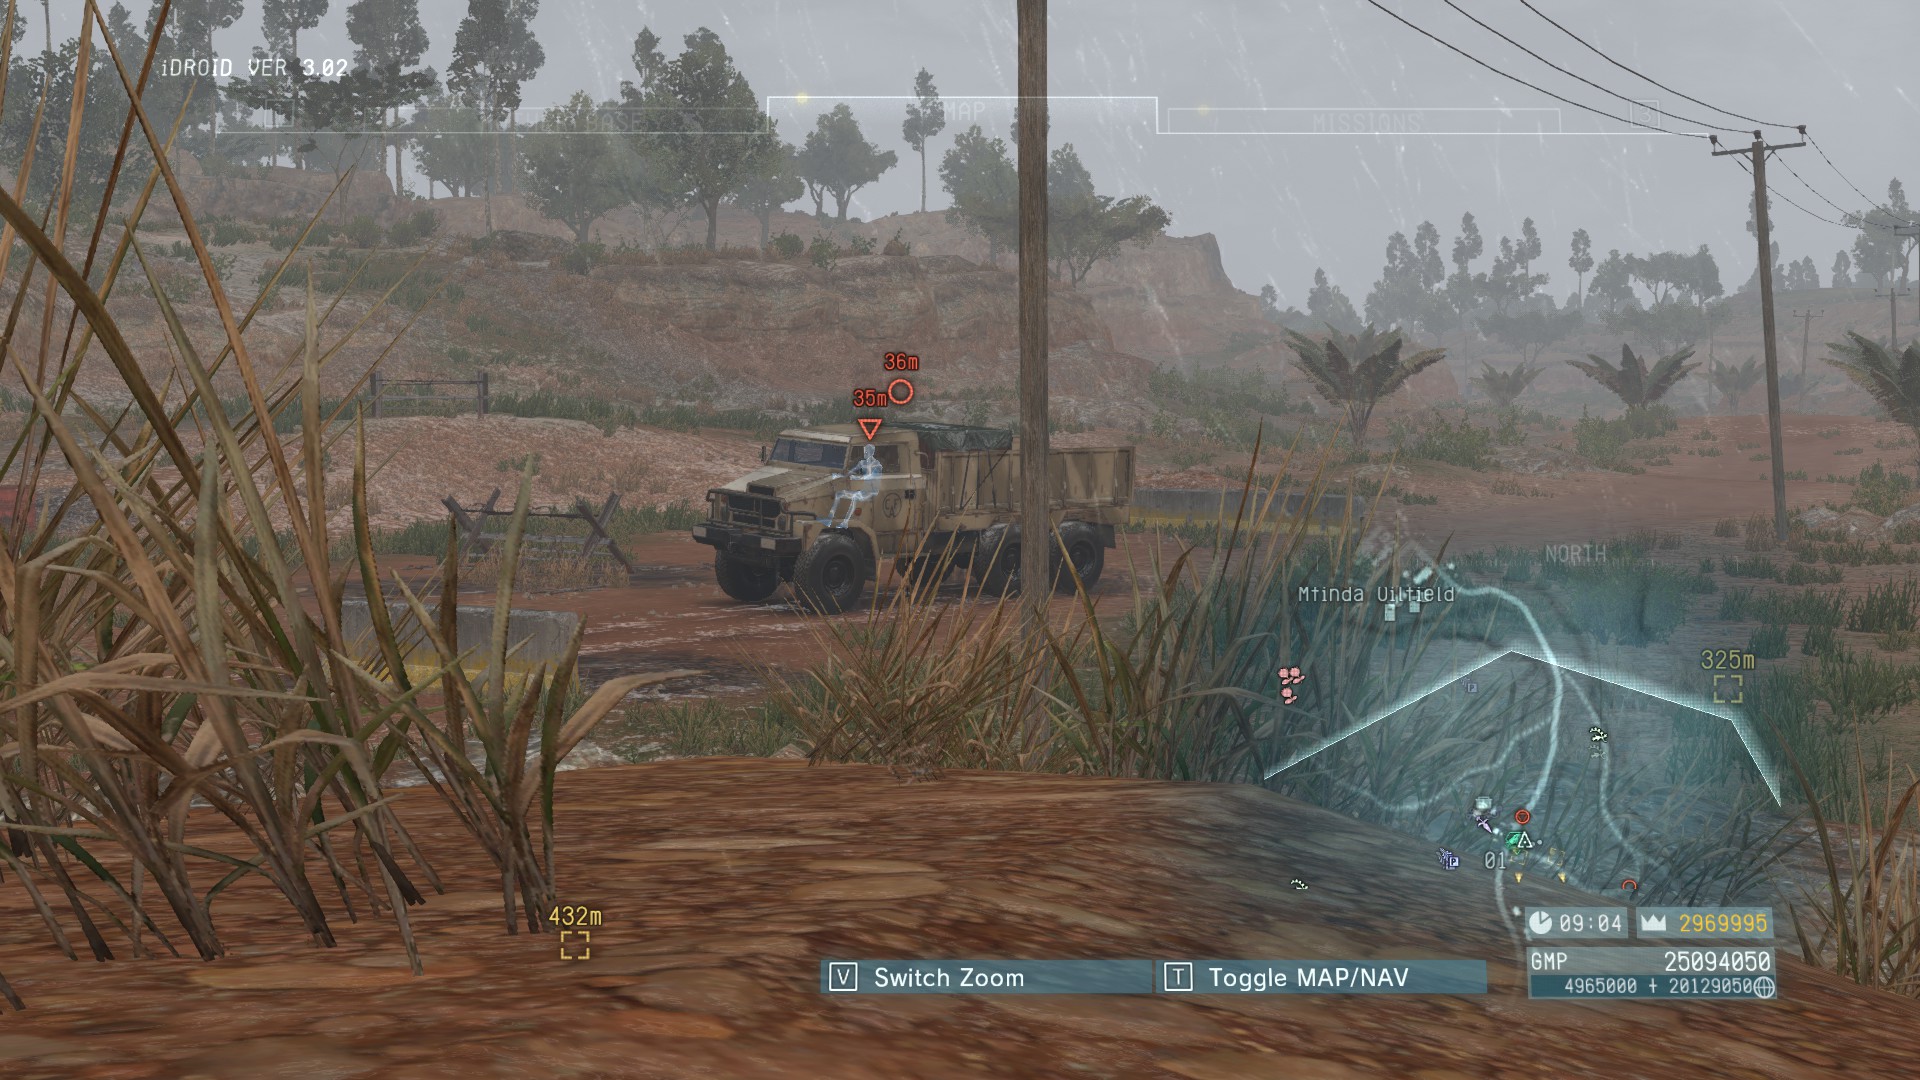 METAL GEAR SOLID V: THE PHANTOM PAIN - All Vehicles and Missions Guide - Rescue The Intel Agents - FA81643